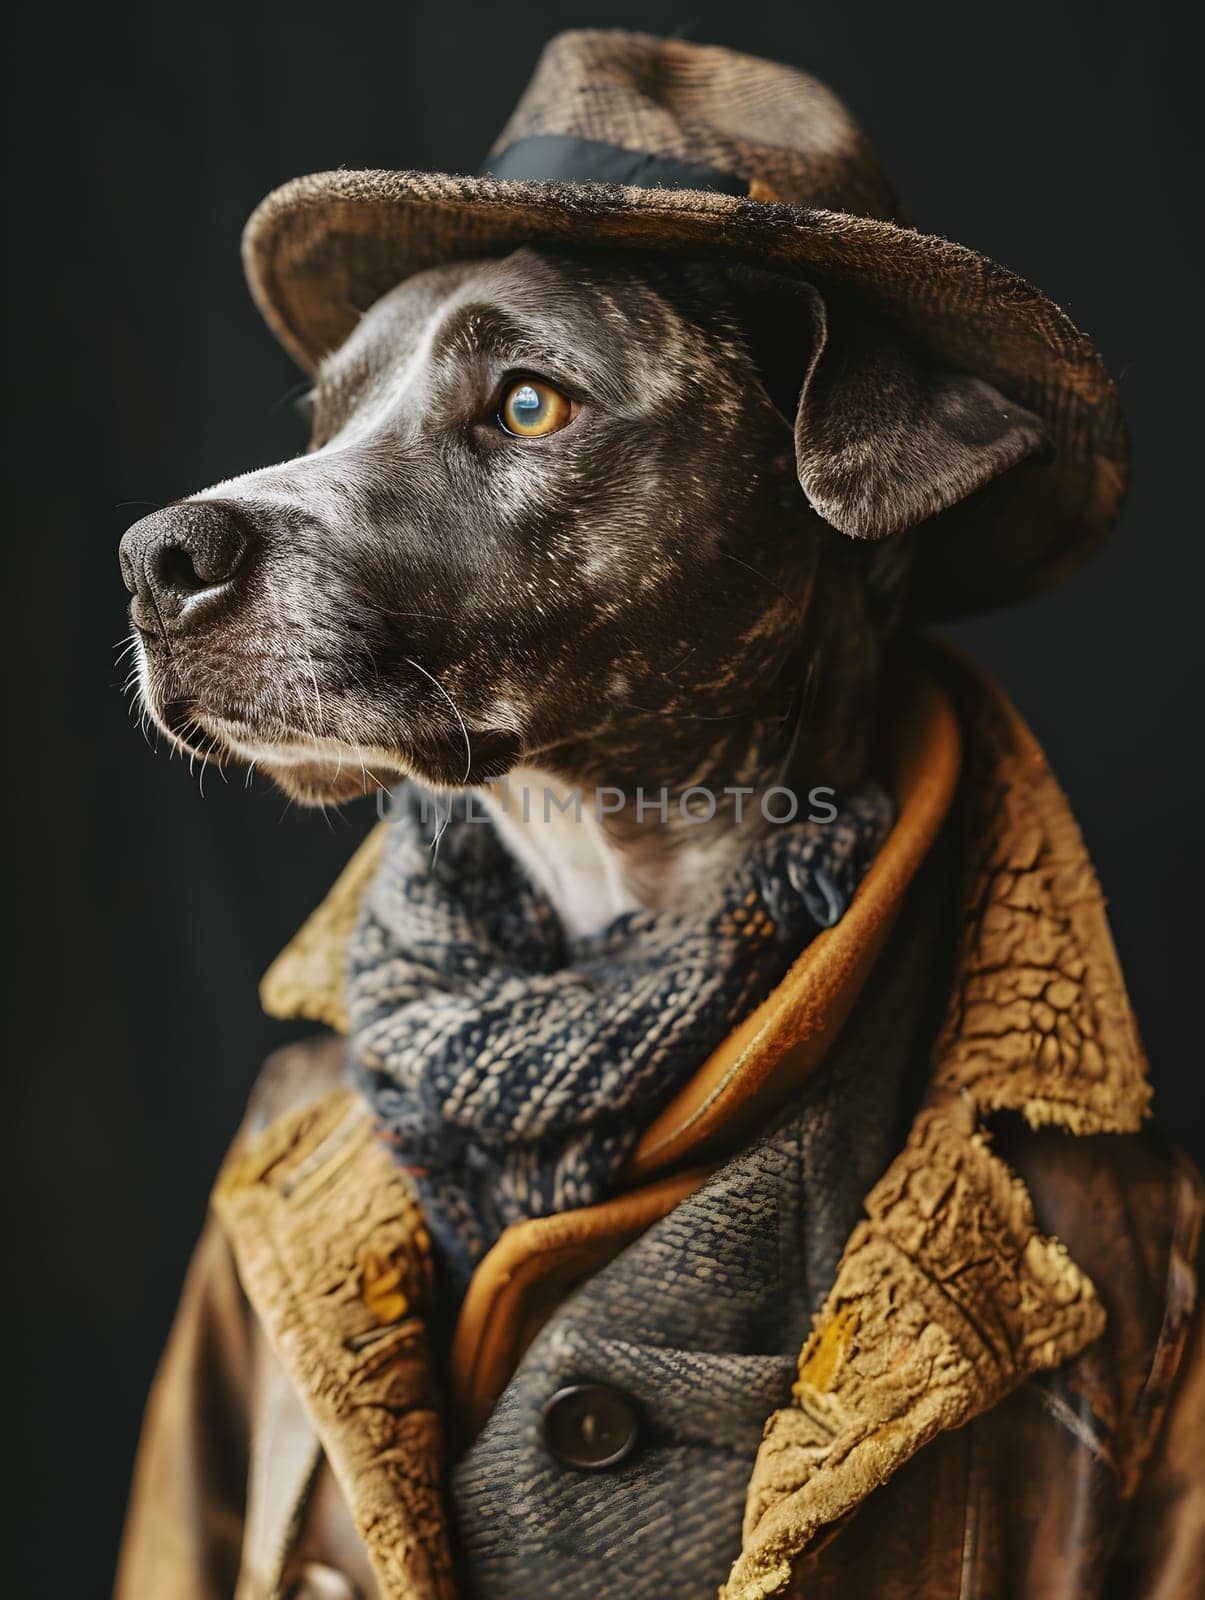 A Terrier dog breed, a Carnivore, is wearing a hat and a coat as a working animal. Its snout, whiskers, and liver make it an artistic and terrestrial animal